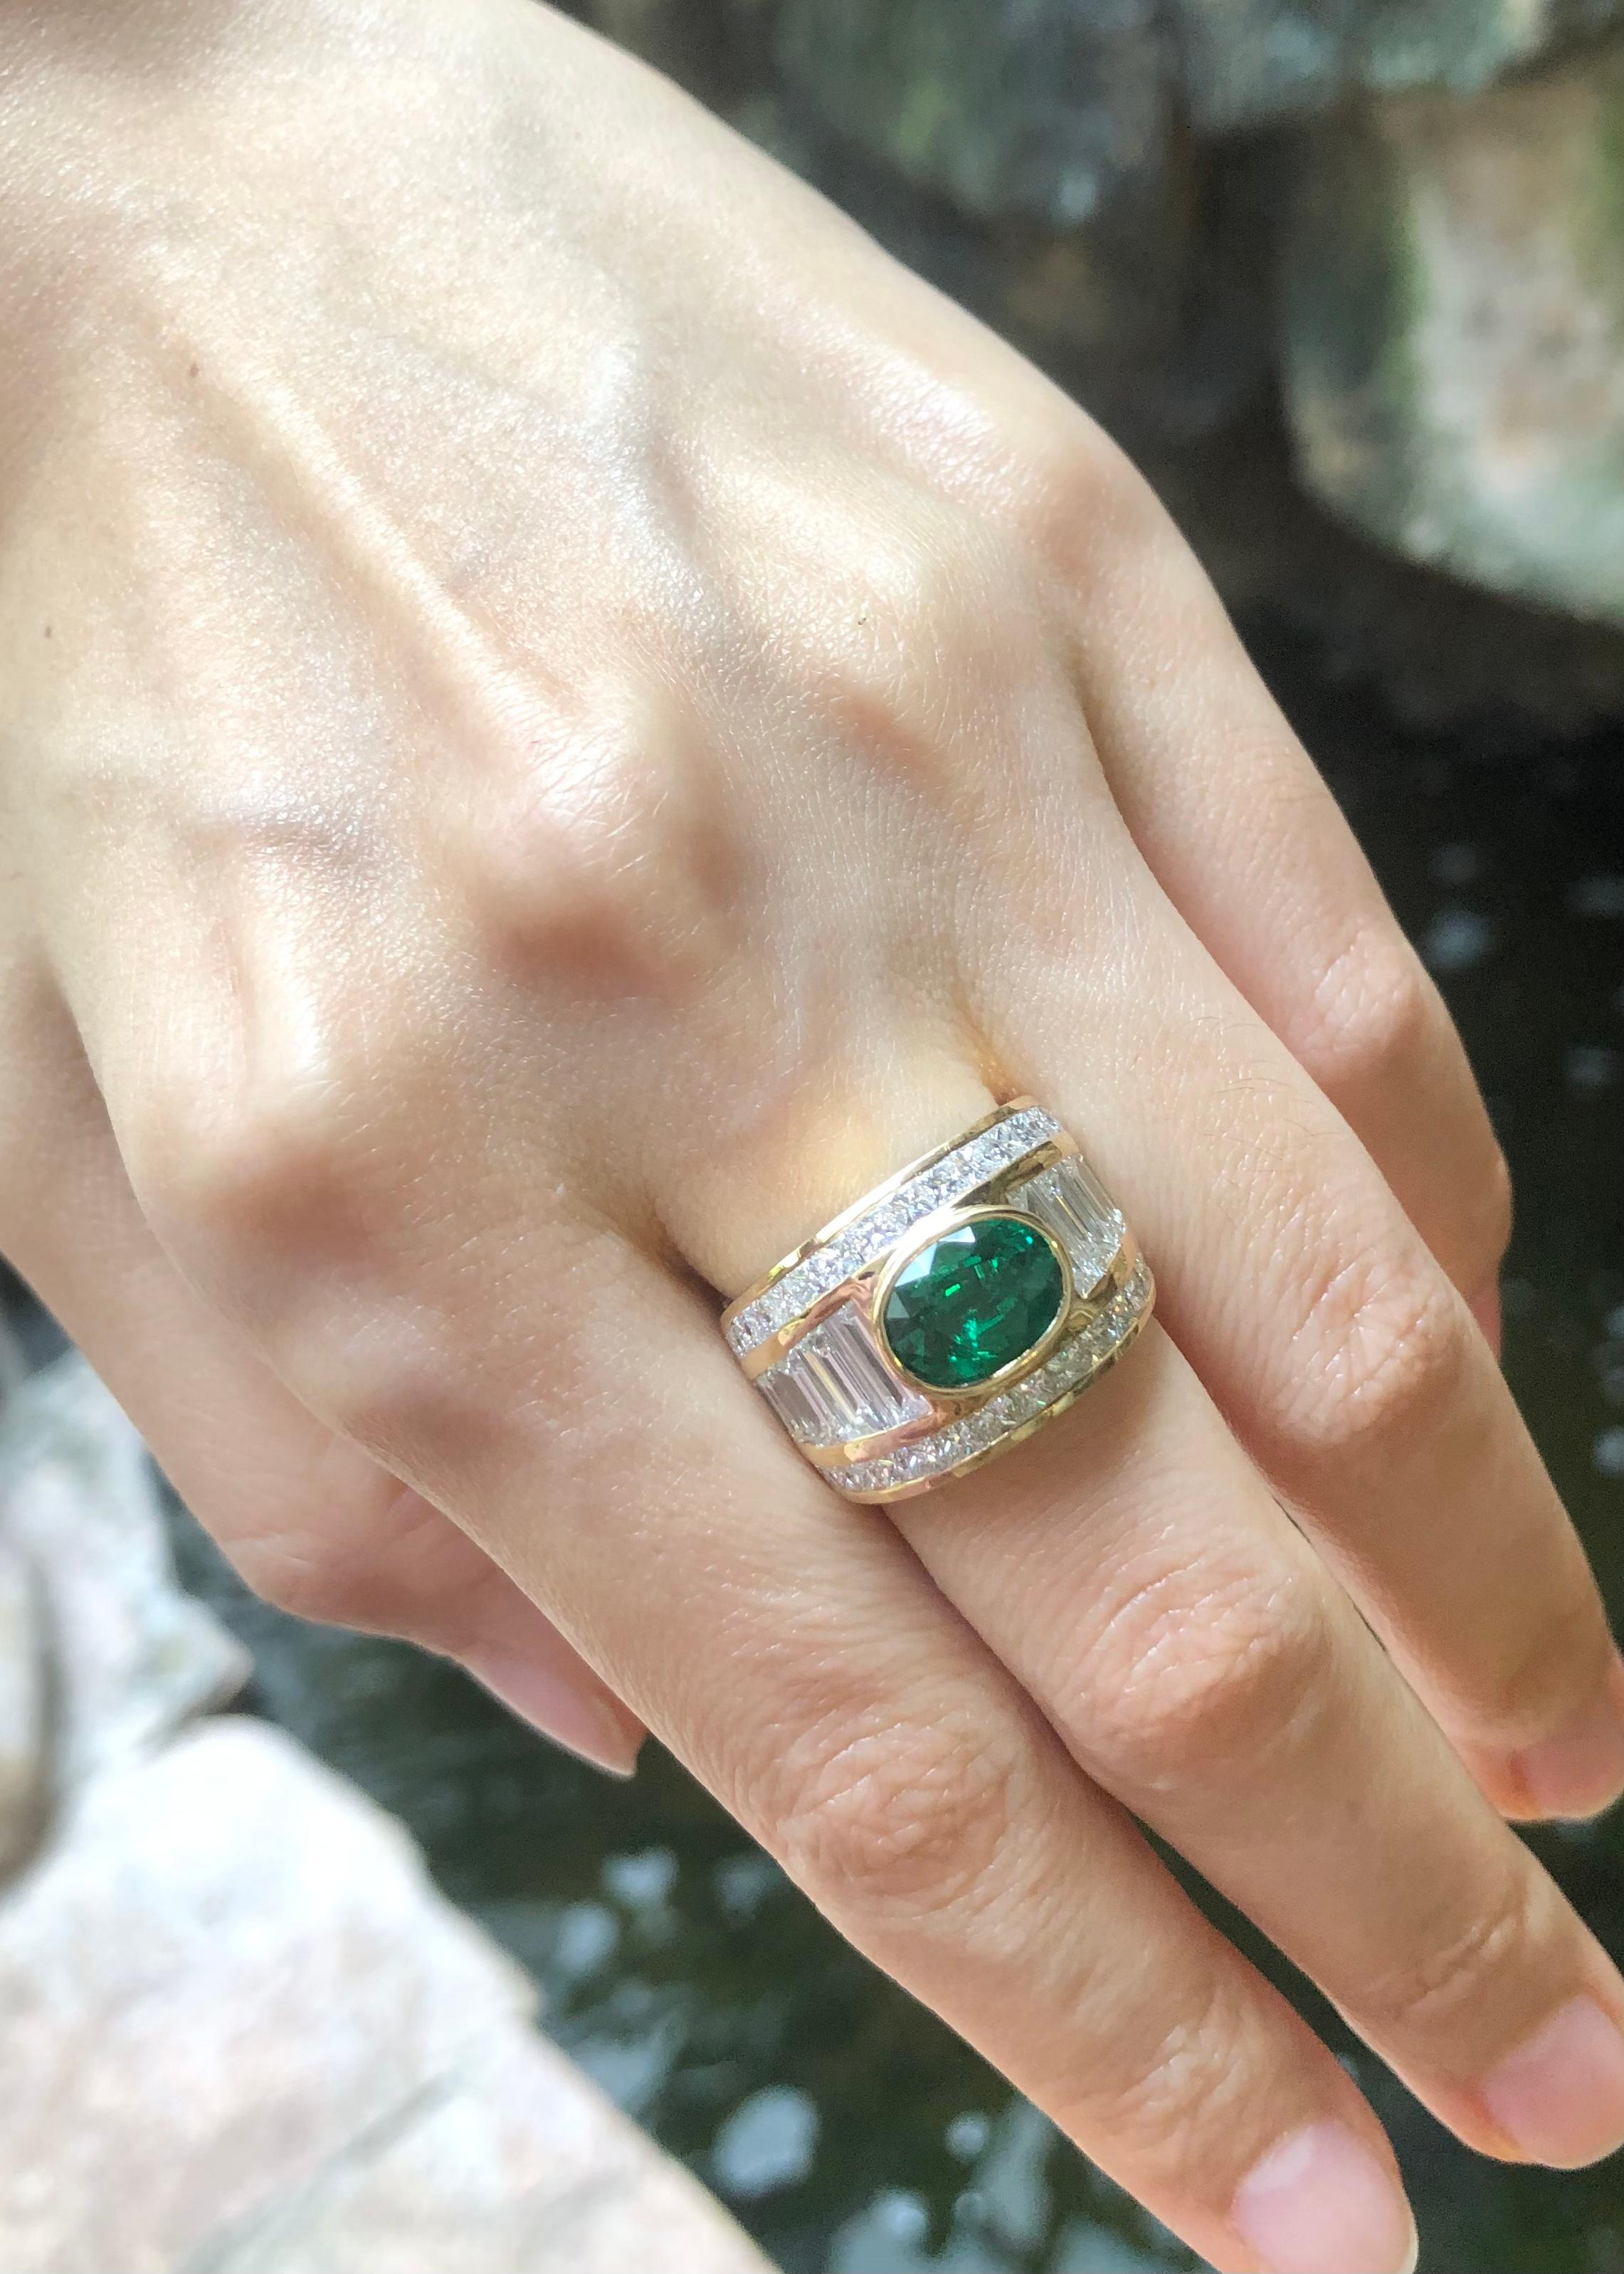 Emerald 2.01 carats and Diamond 4.09 carats Ring set in 18K Gold Settings

Width:  2.0 cm 
Length: 1.5 cm
Ring Size: 53
Total Weight: 13.43 grams

